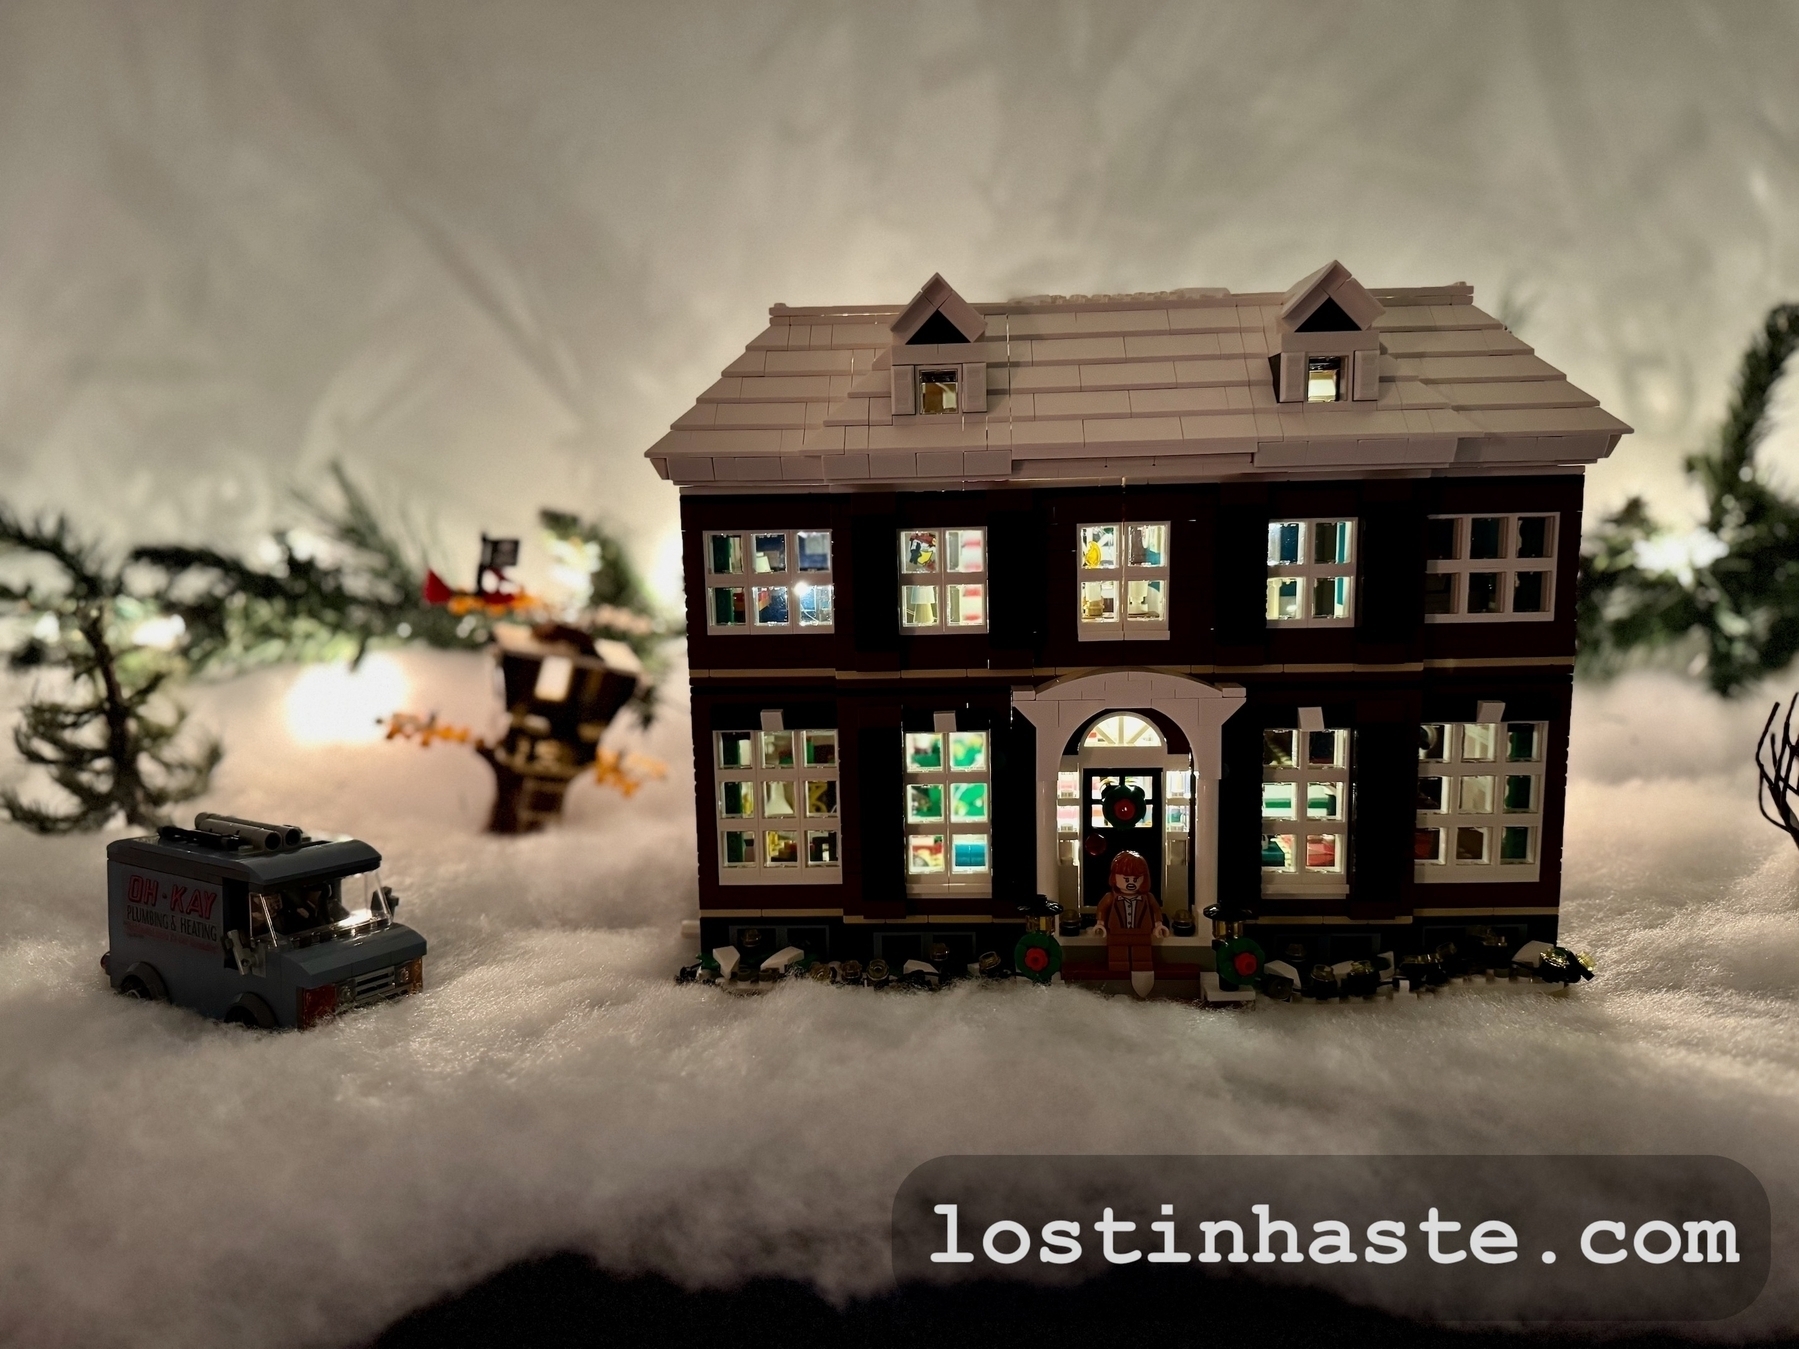 A miniature house (the Home Alone house, in Lego form), filled with lights, and van on a snowy landscape, surrounded by trees, with the website address 'lostinhaste.com' displayed as a watermark.